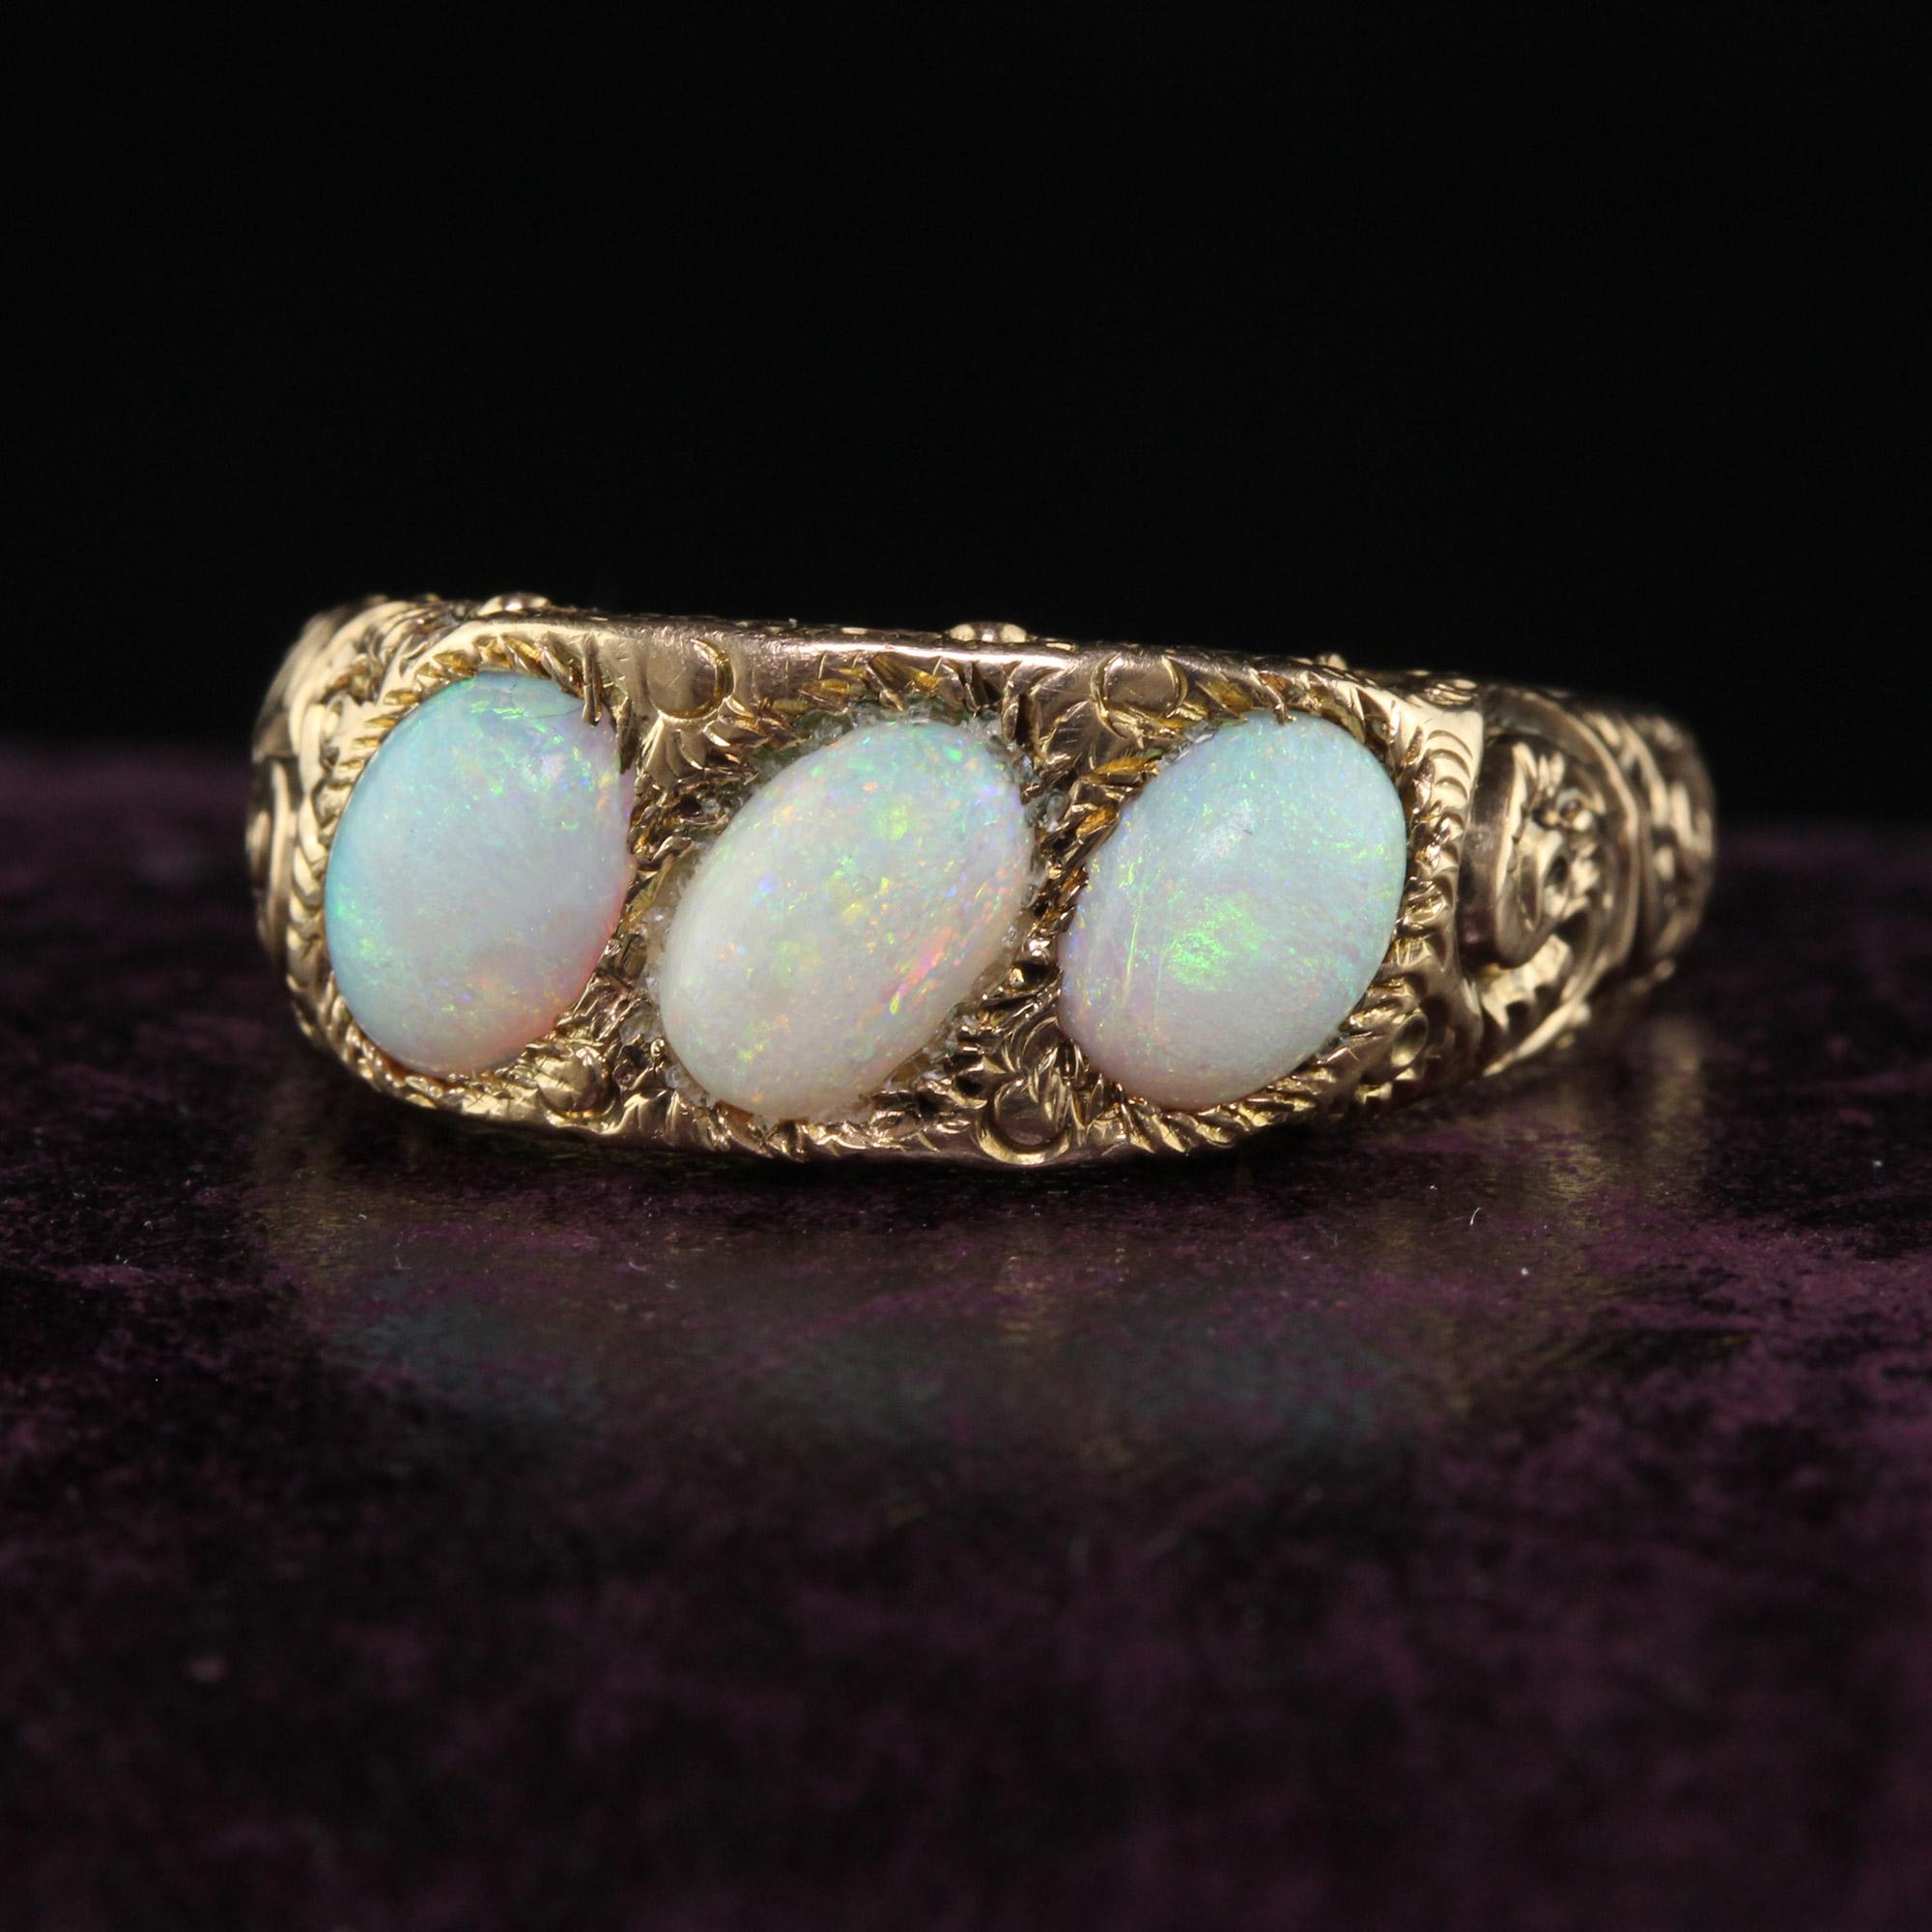 Beautiful Antique Victorian 12K Yellow Gold Three Stone Opal Engraved Cocktail Ring. This beautiful three stone band is crafted in 12k yellow gold. The center holds three oval cut opals that are set at an angle which is very unique. The sides are